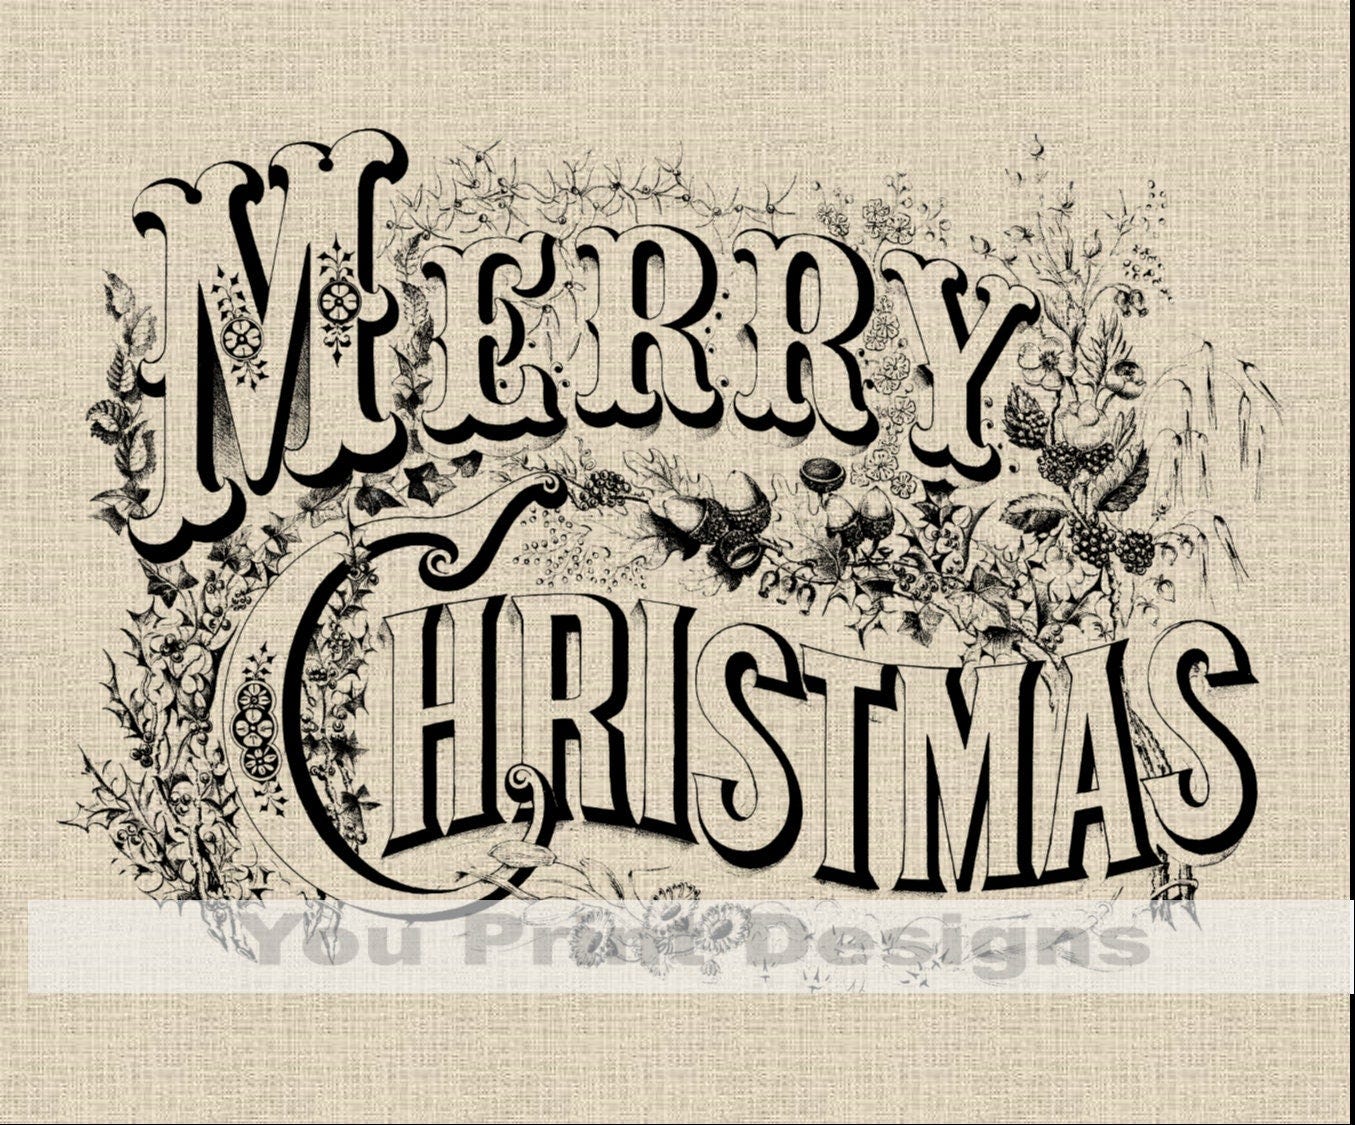 Vintage Merry Christmas Typography, Transparent & Reverse or Inverted, PNG  JPEG Files, Scrapbooking, Iron On, Card Making, Digital Clipart